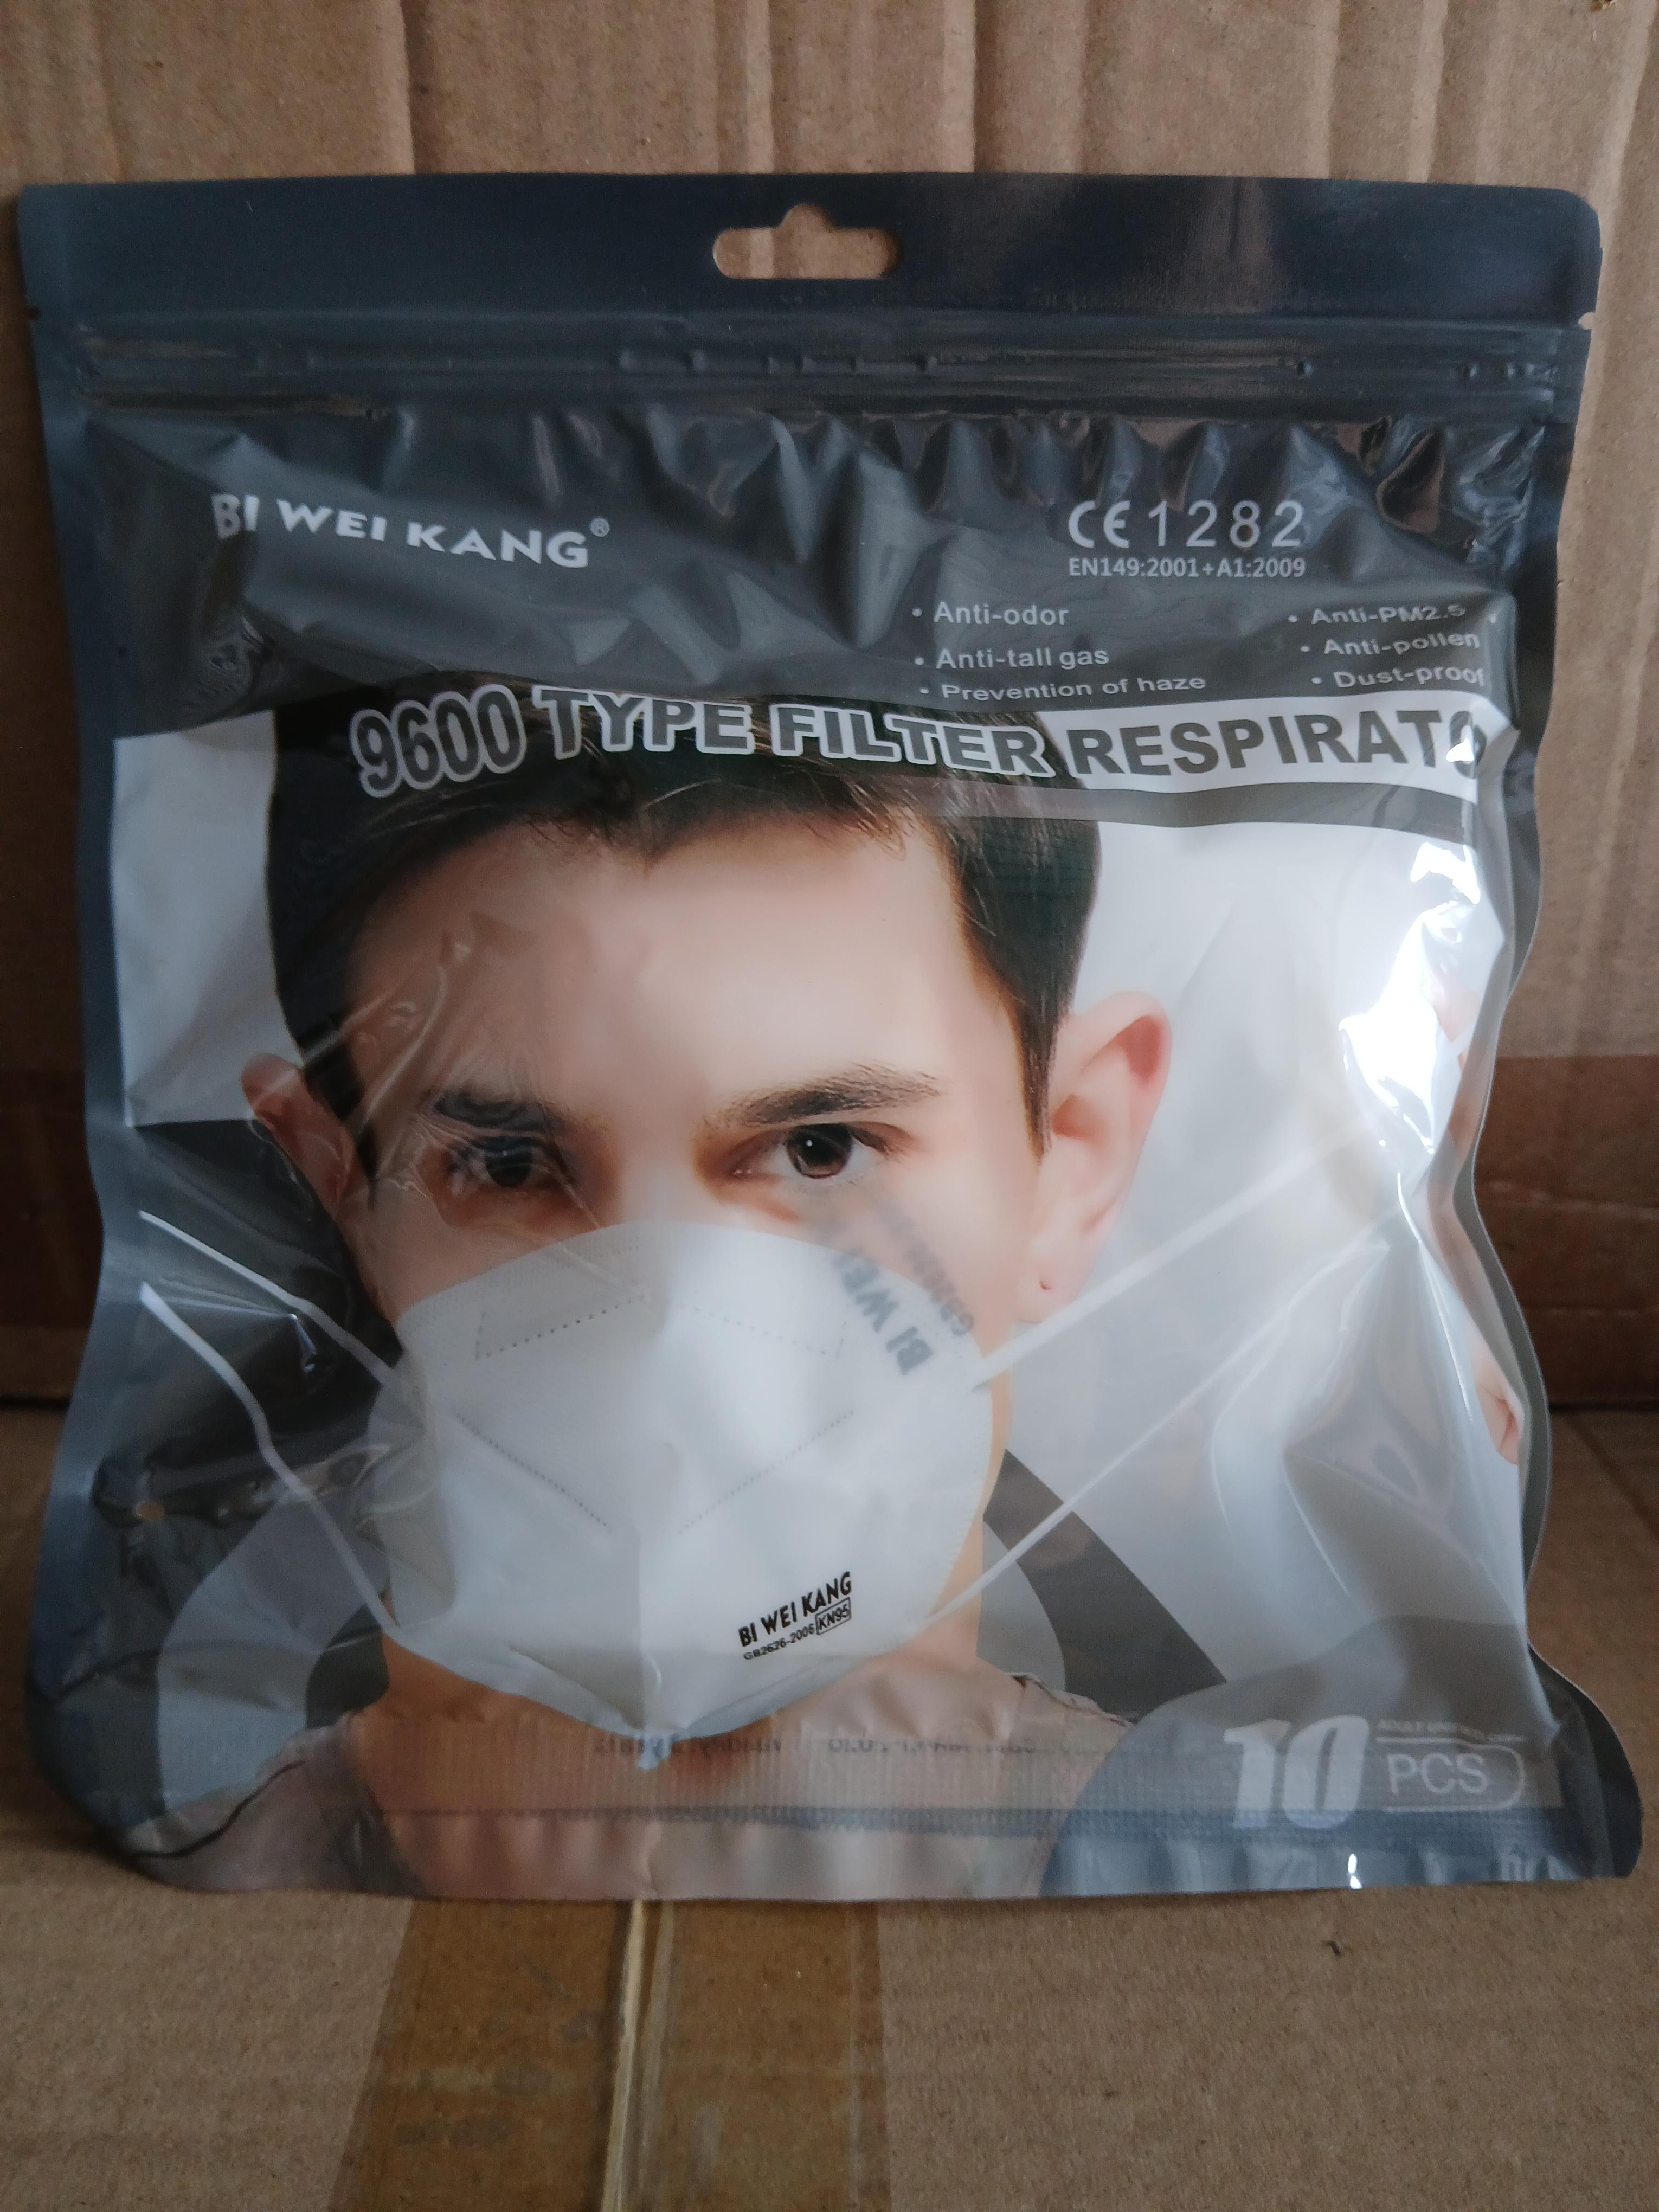 KN-95 Face Mask 9600 Type Filter Respirator / (10) Filters Per Bag / (100) Bags Per Case This lot co